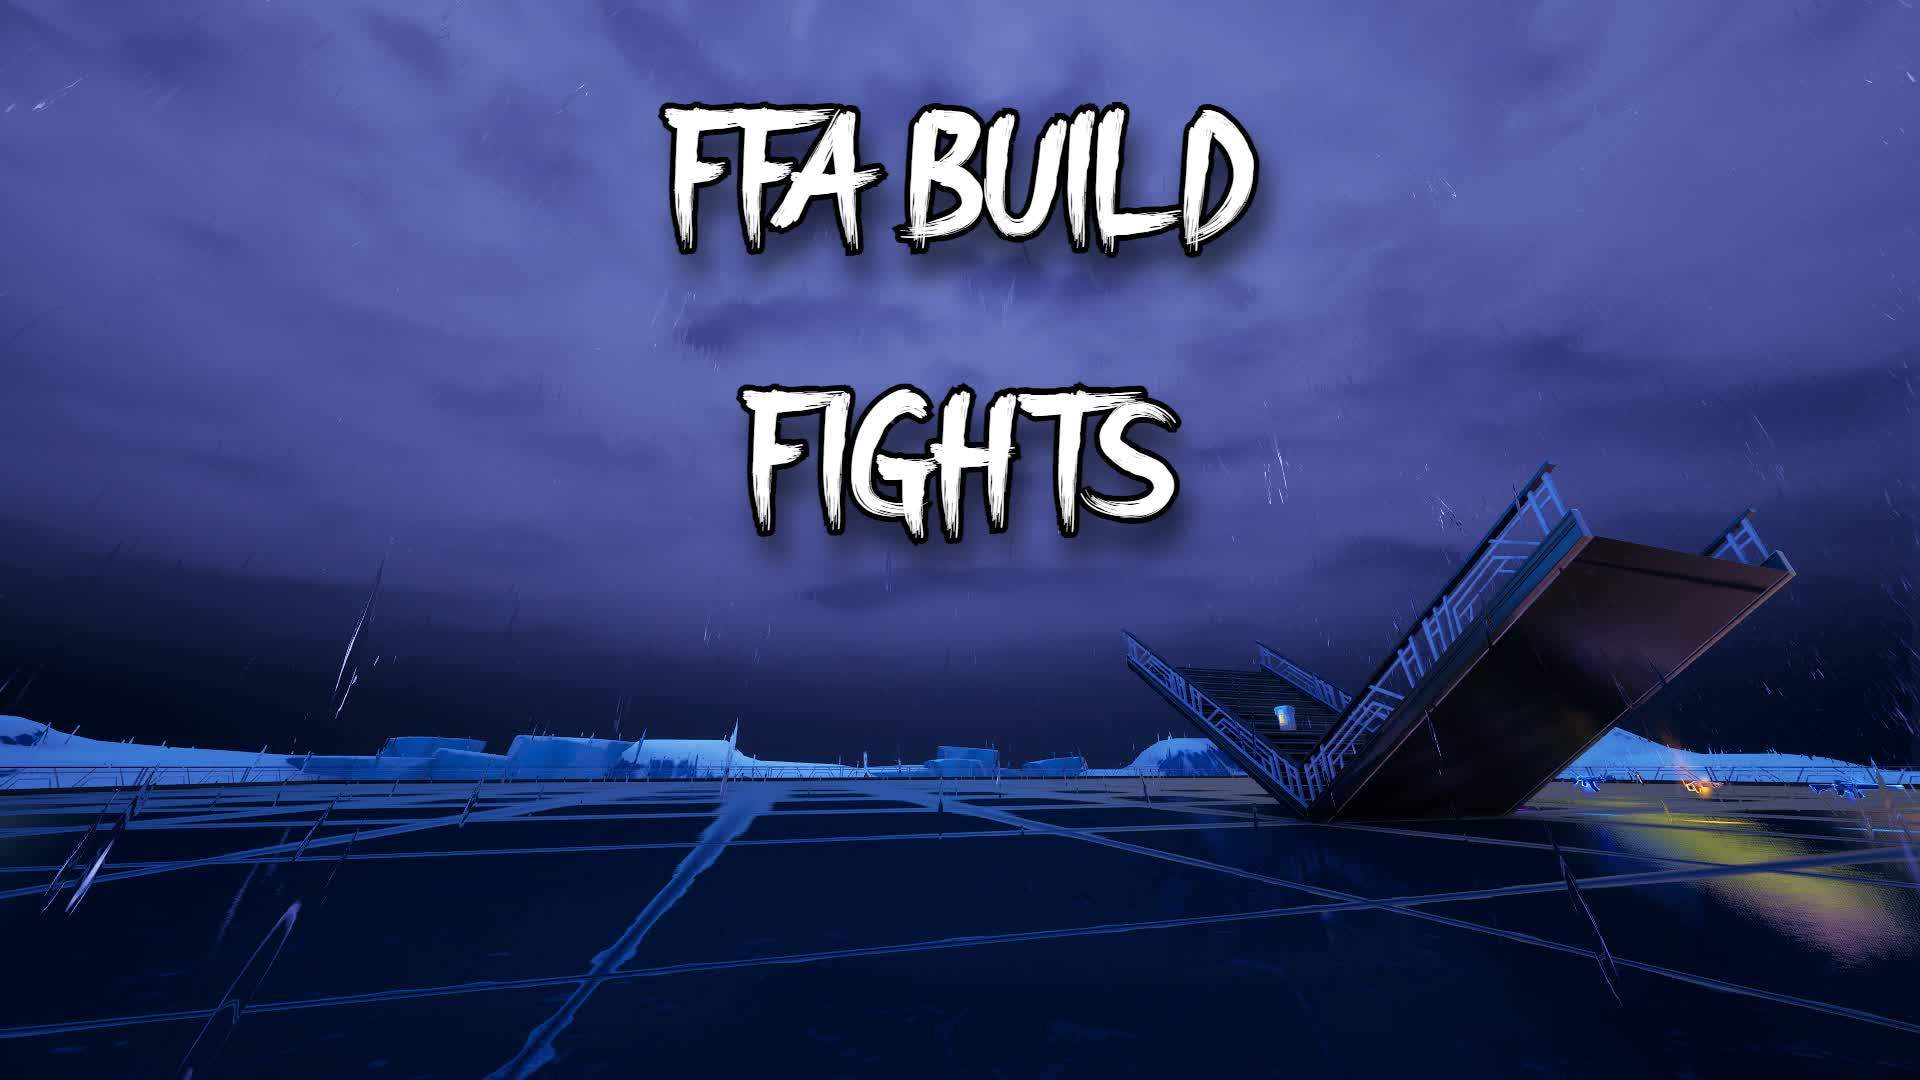 FFA BUILDS FIGHTS